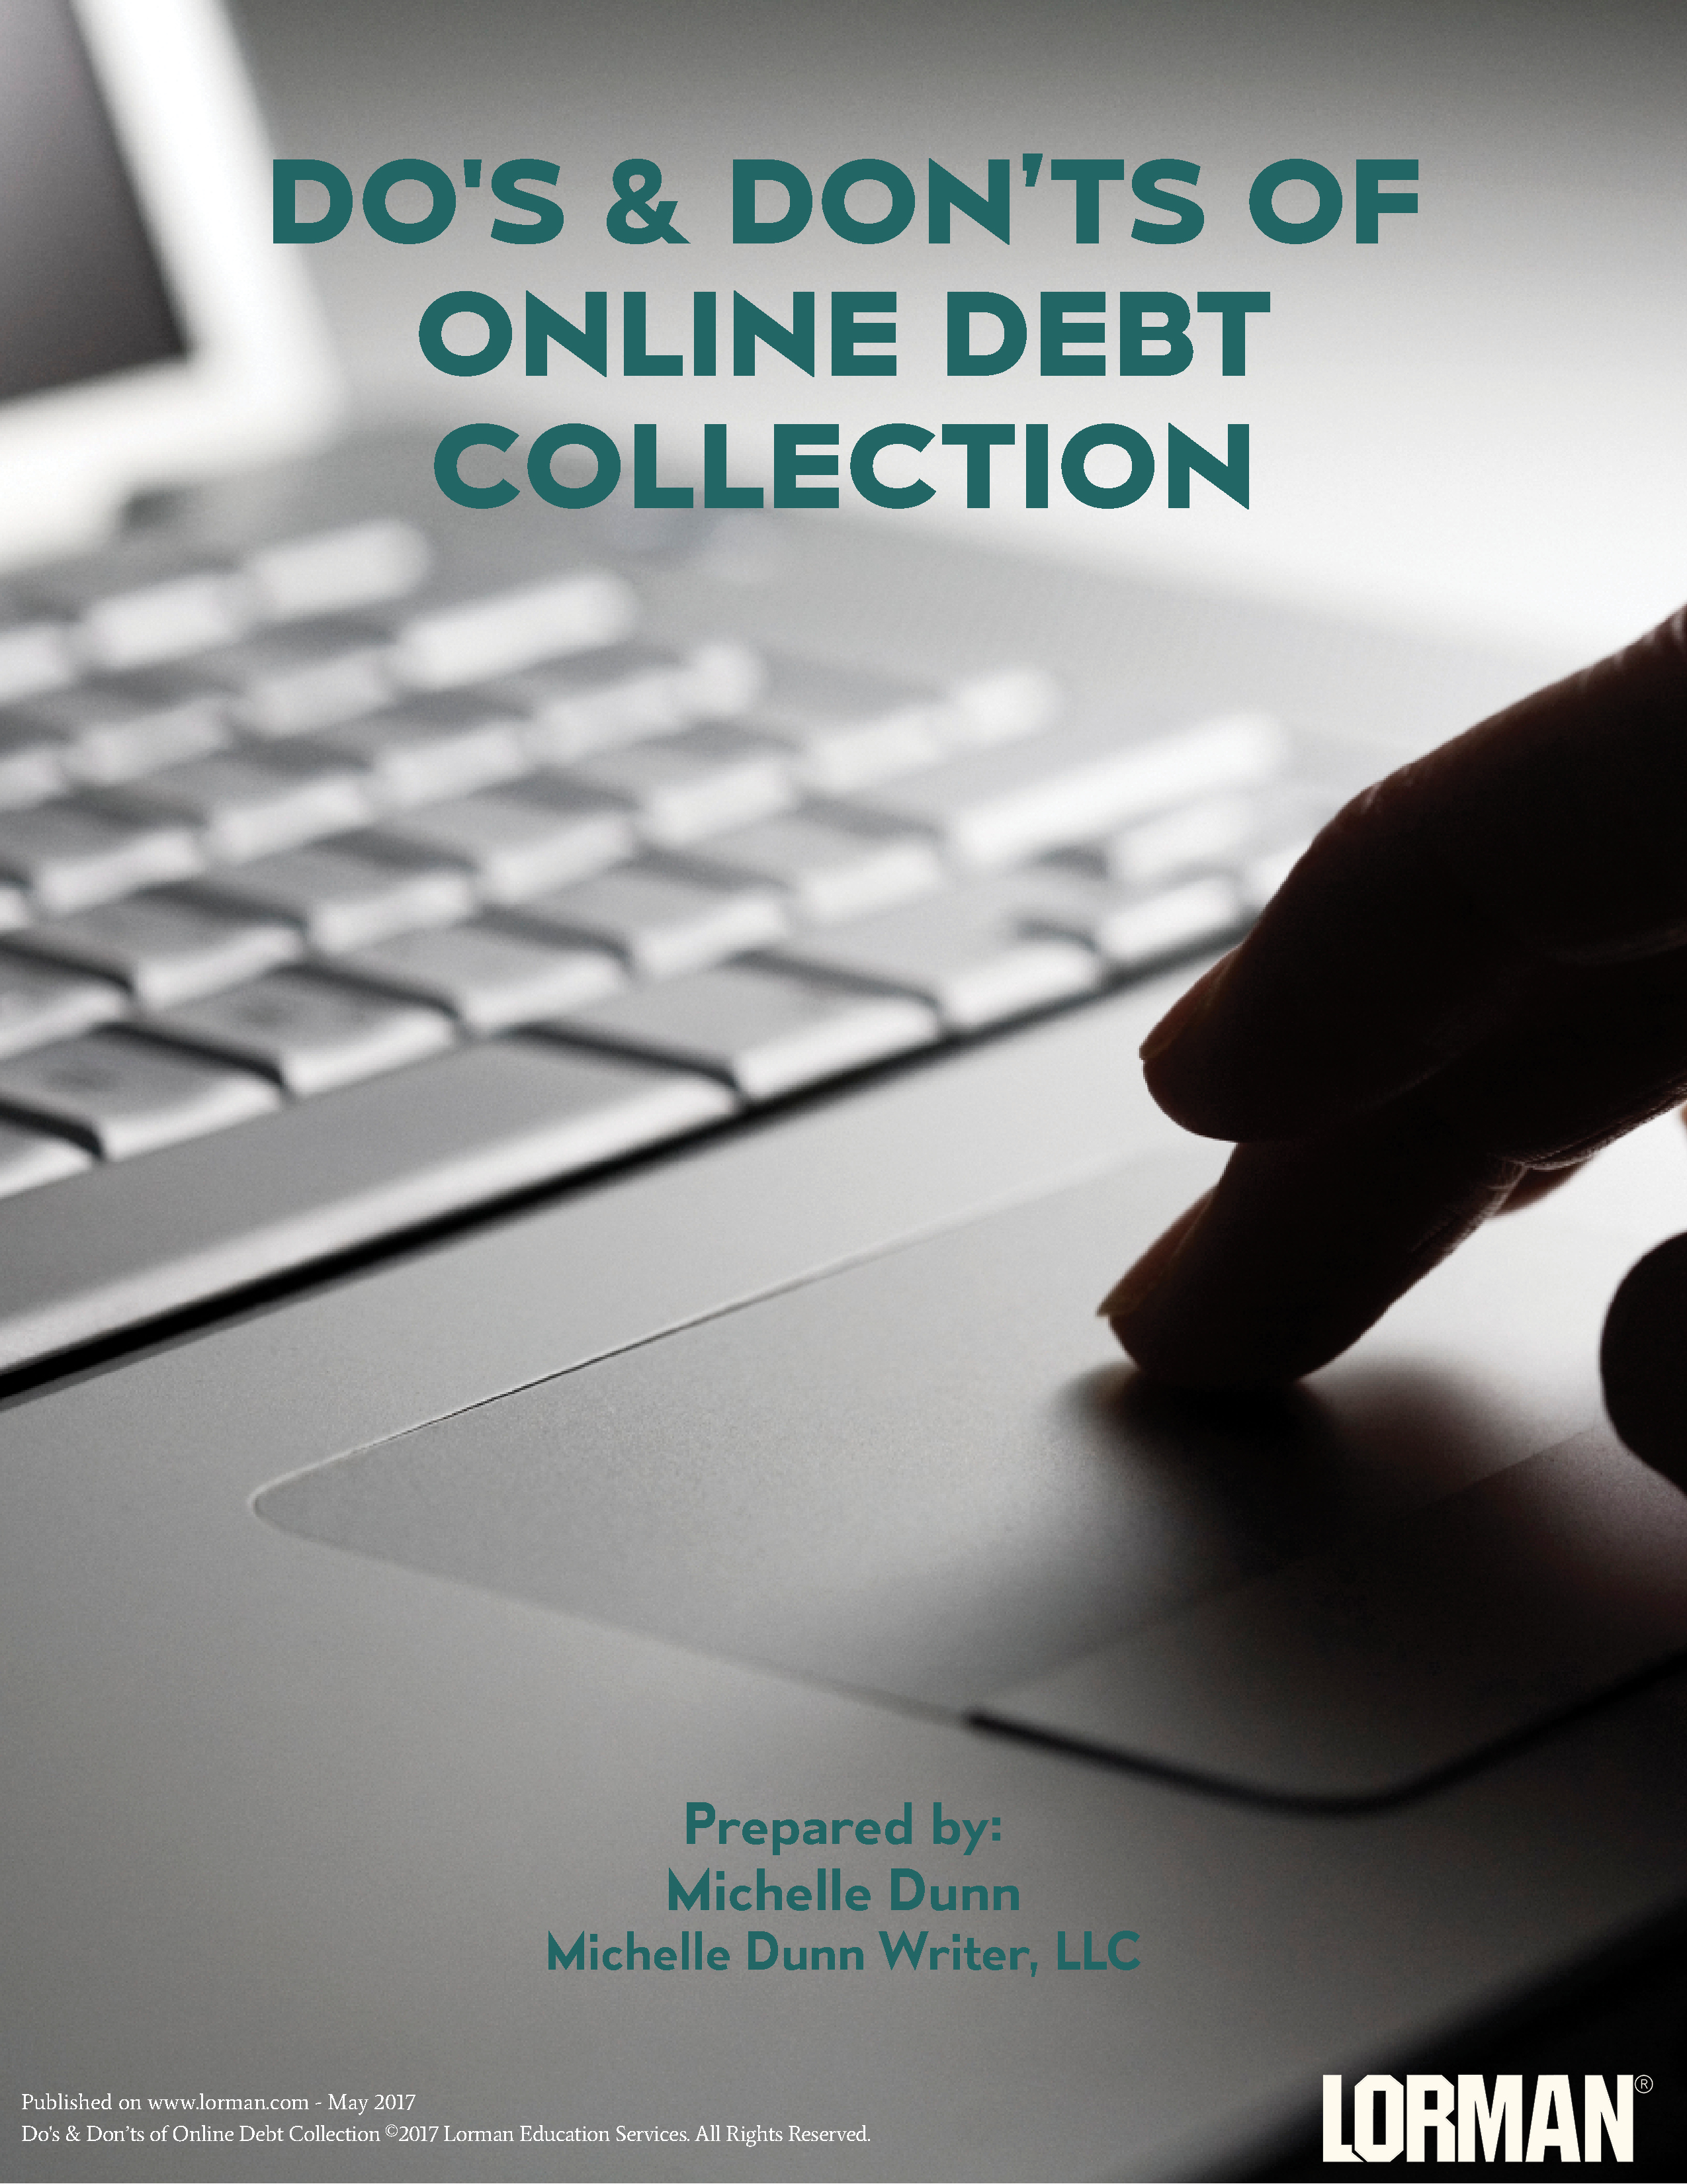 Do's & Don’ts of Online Debt Collection